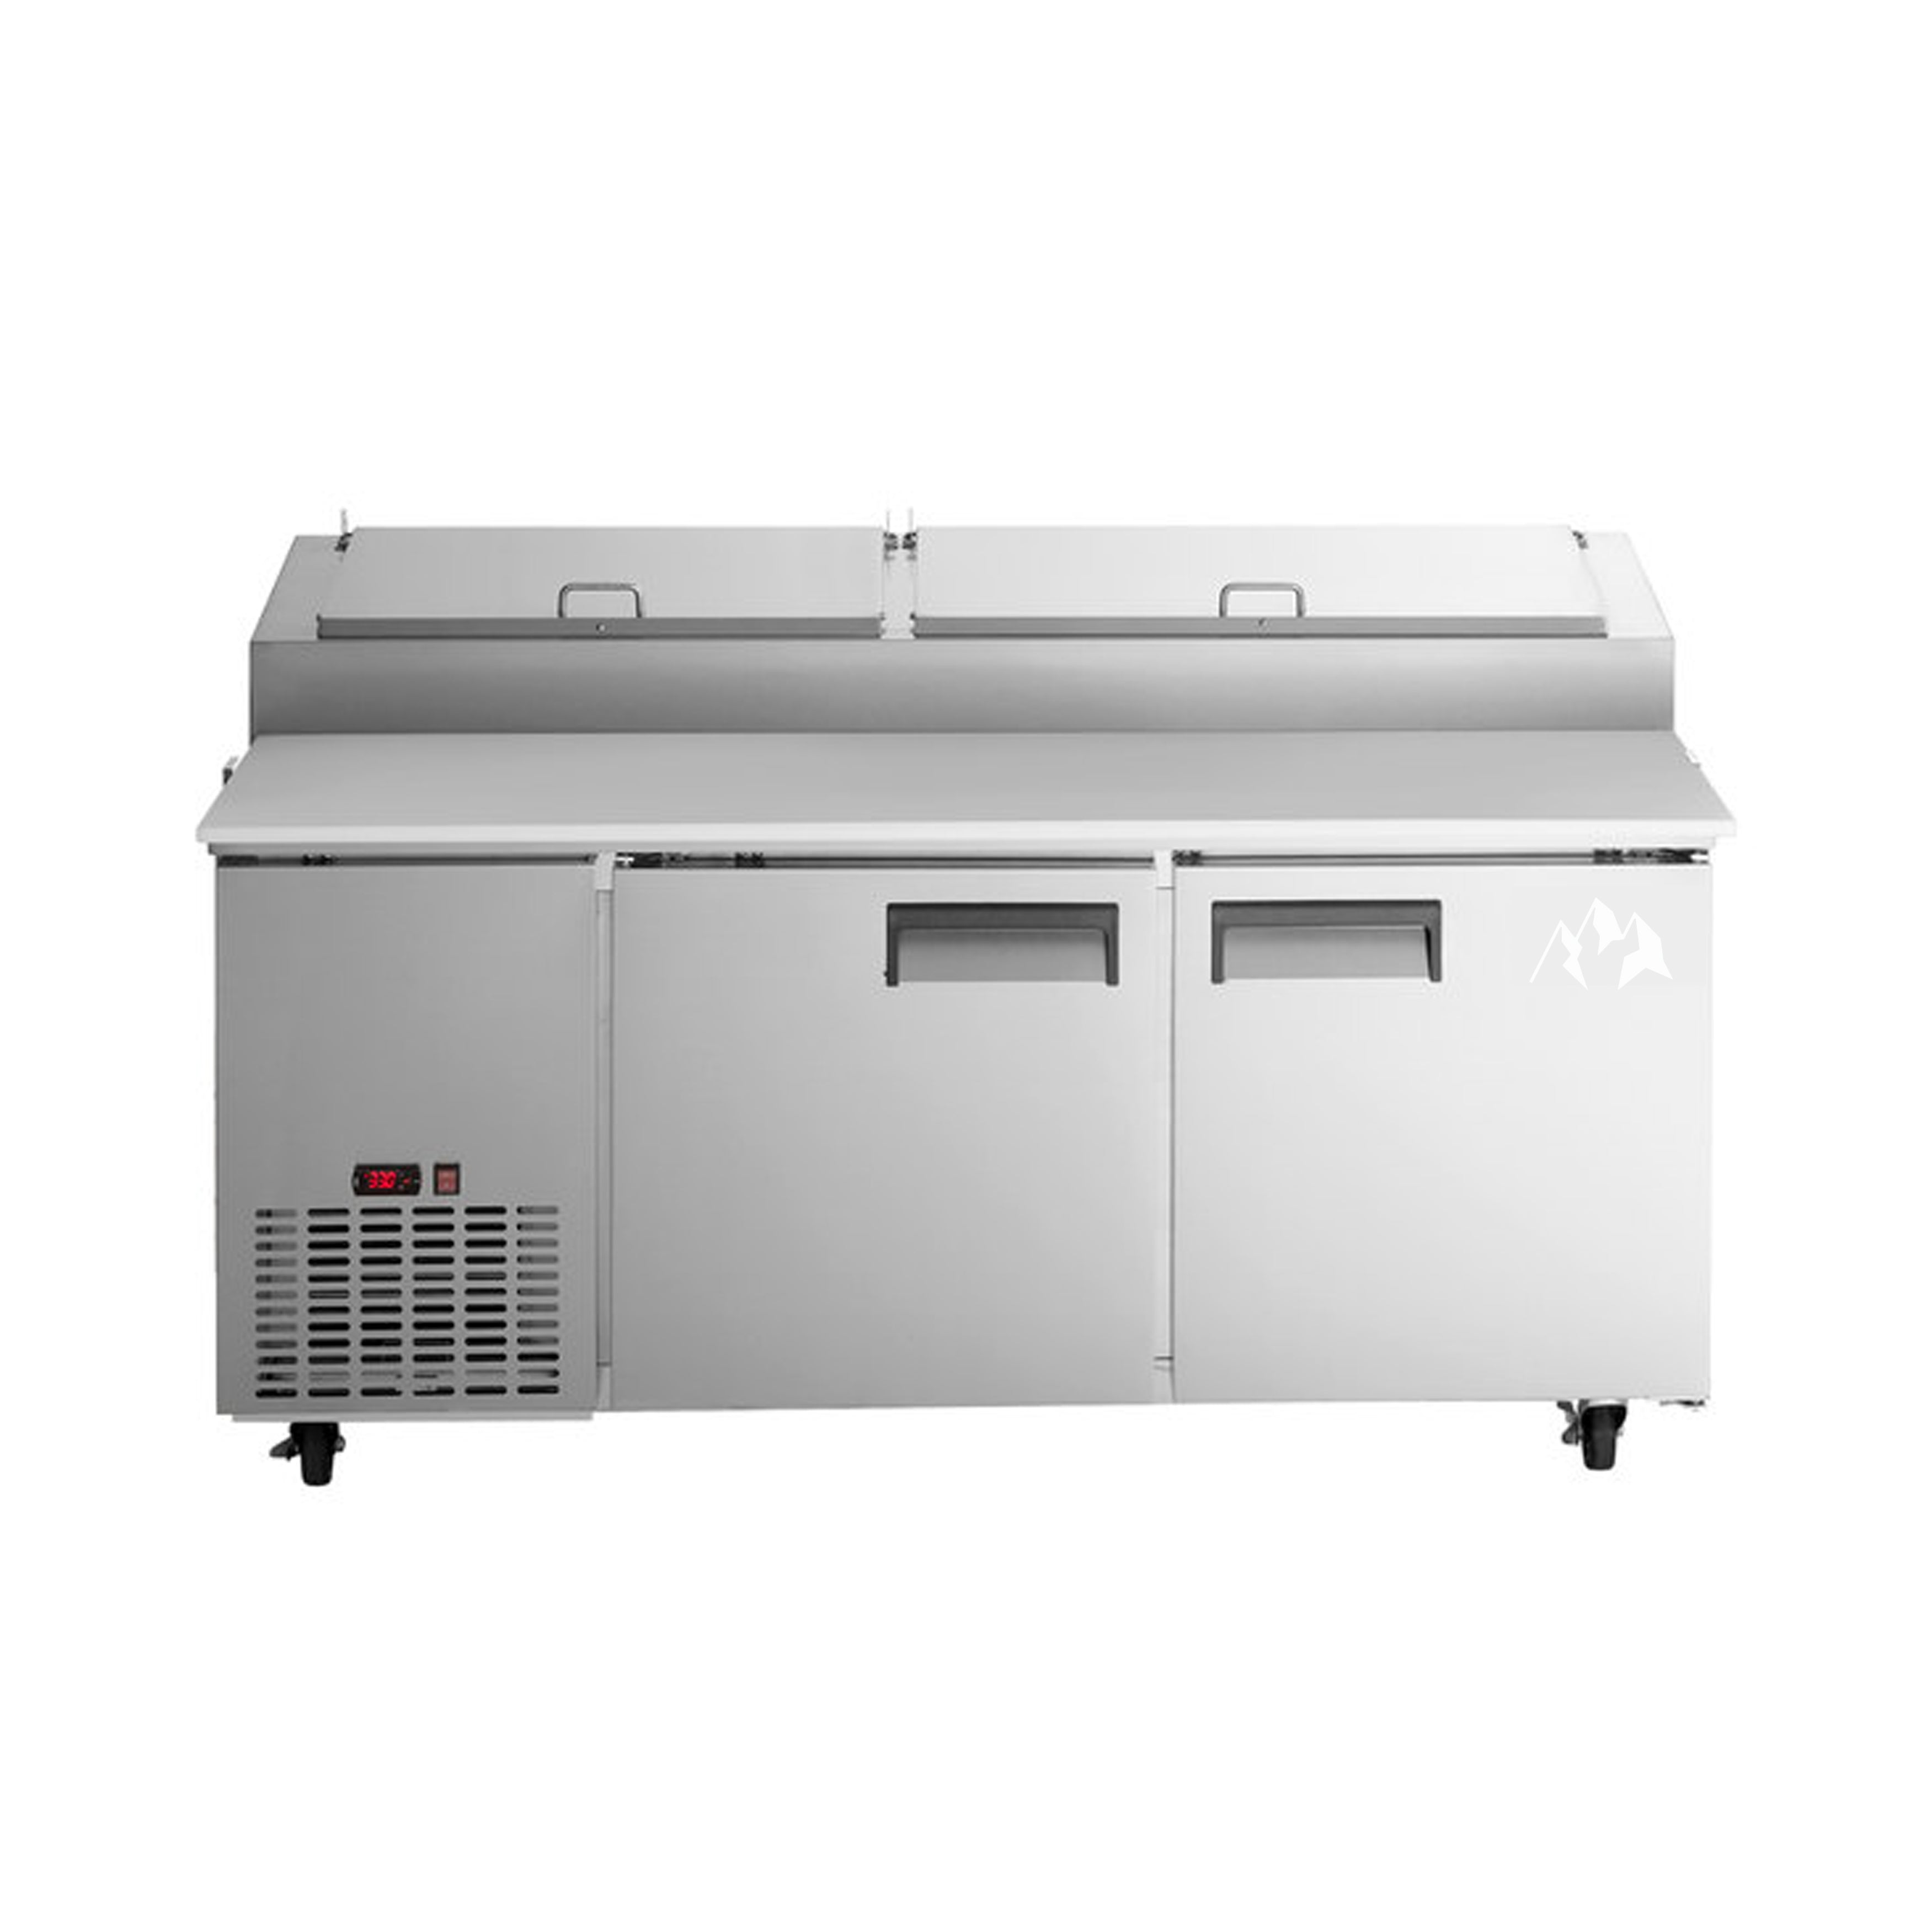 Chef AAA - PICL2-HC, 71" Commercial Sandwich Prep Table Refrigerator 9 Pans 2 Door Stainless Steel 16.9 cu.ft.